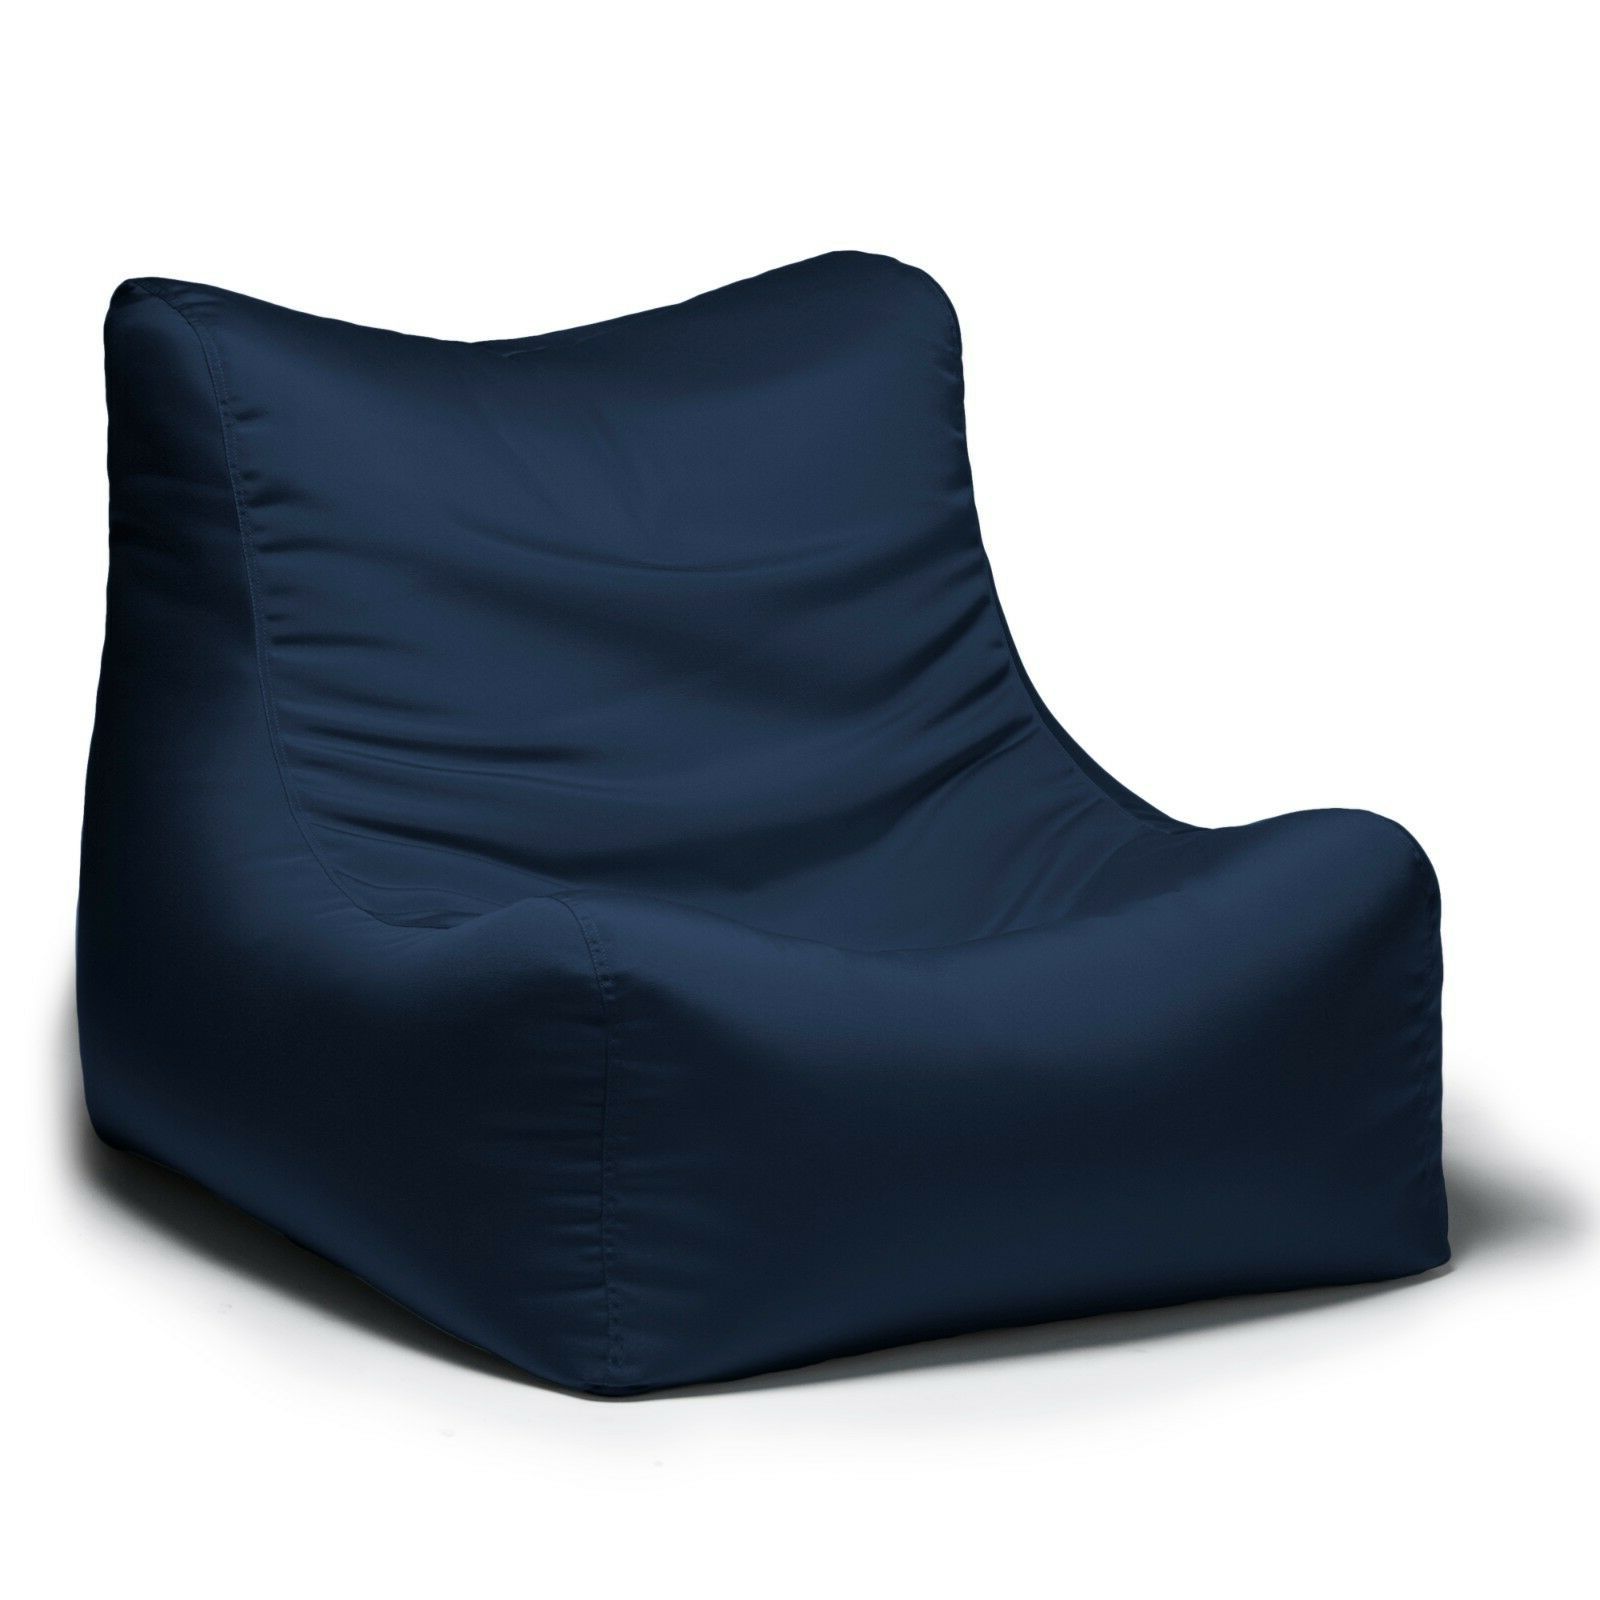 Jaxx Twist Outdoor Patio Bean Bag Chairs In Most Up To Date Jaxx Ponce Outdoor Bean Bag Lounge Chair (View 24 of 25)